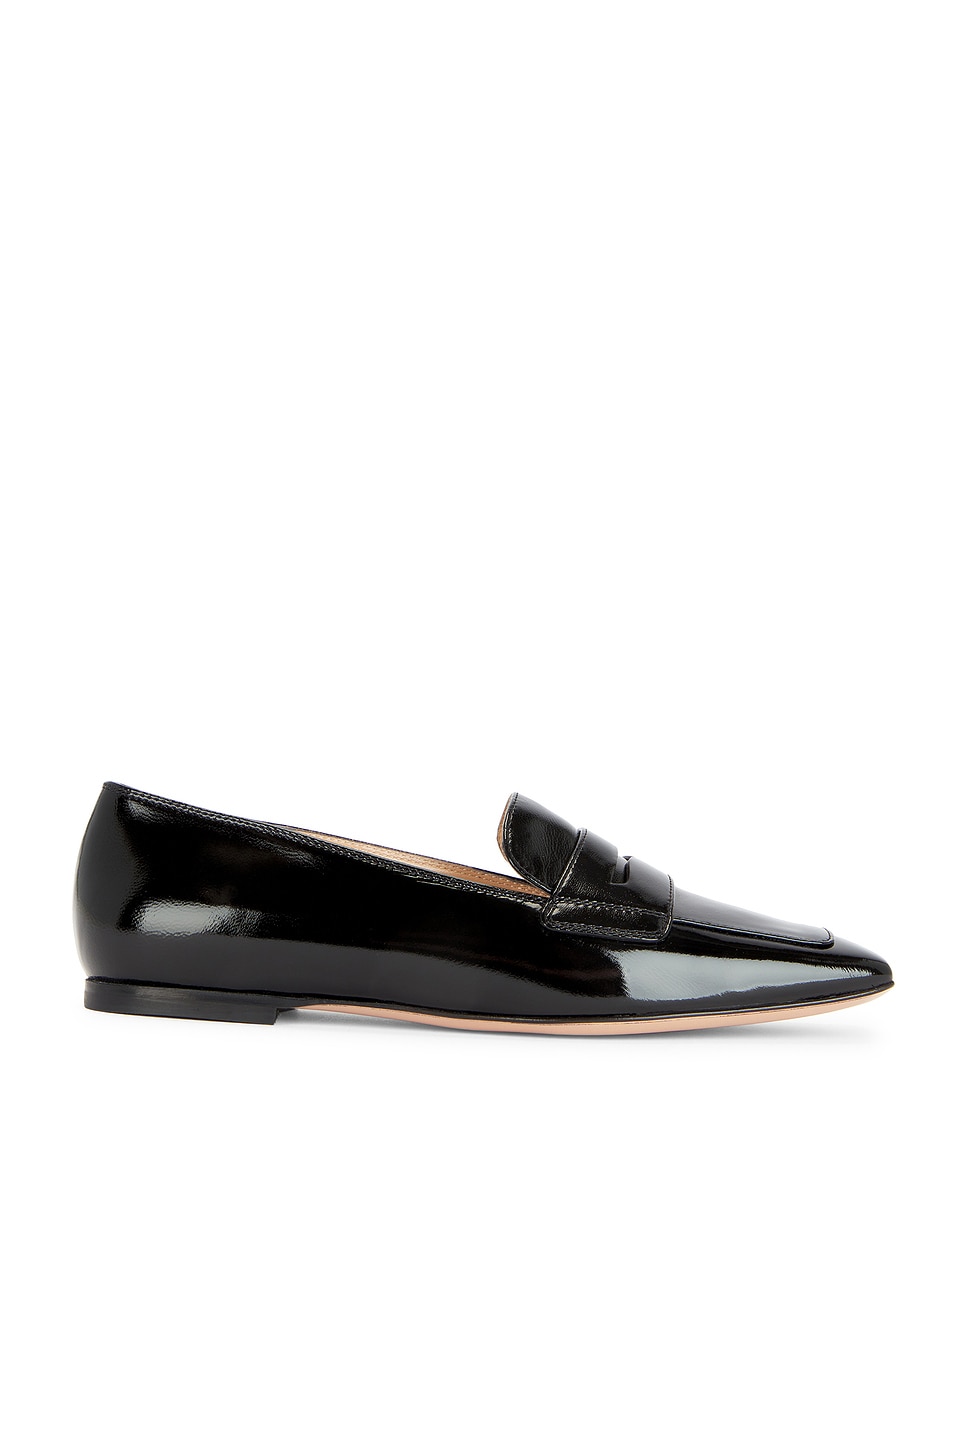 Image 1 of Gianvito Rossi Nuit Loafer in Black